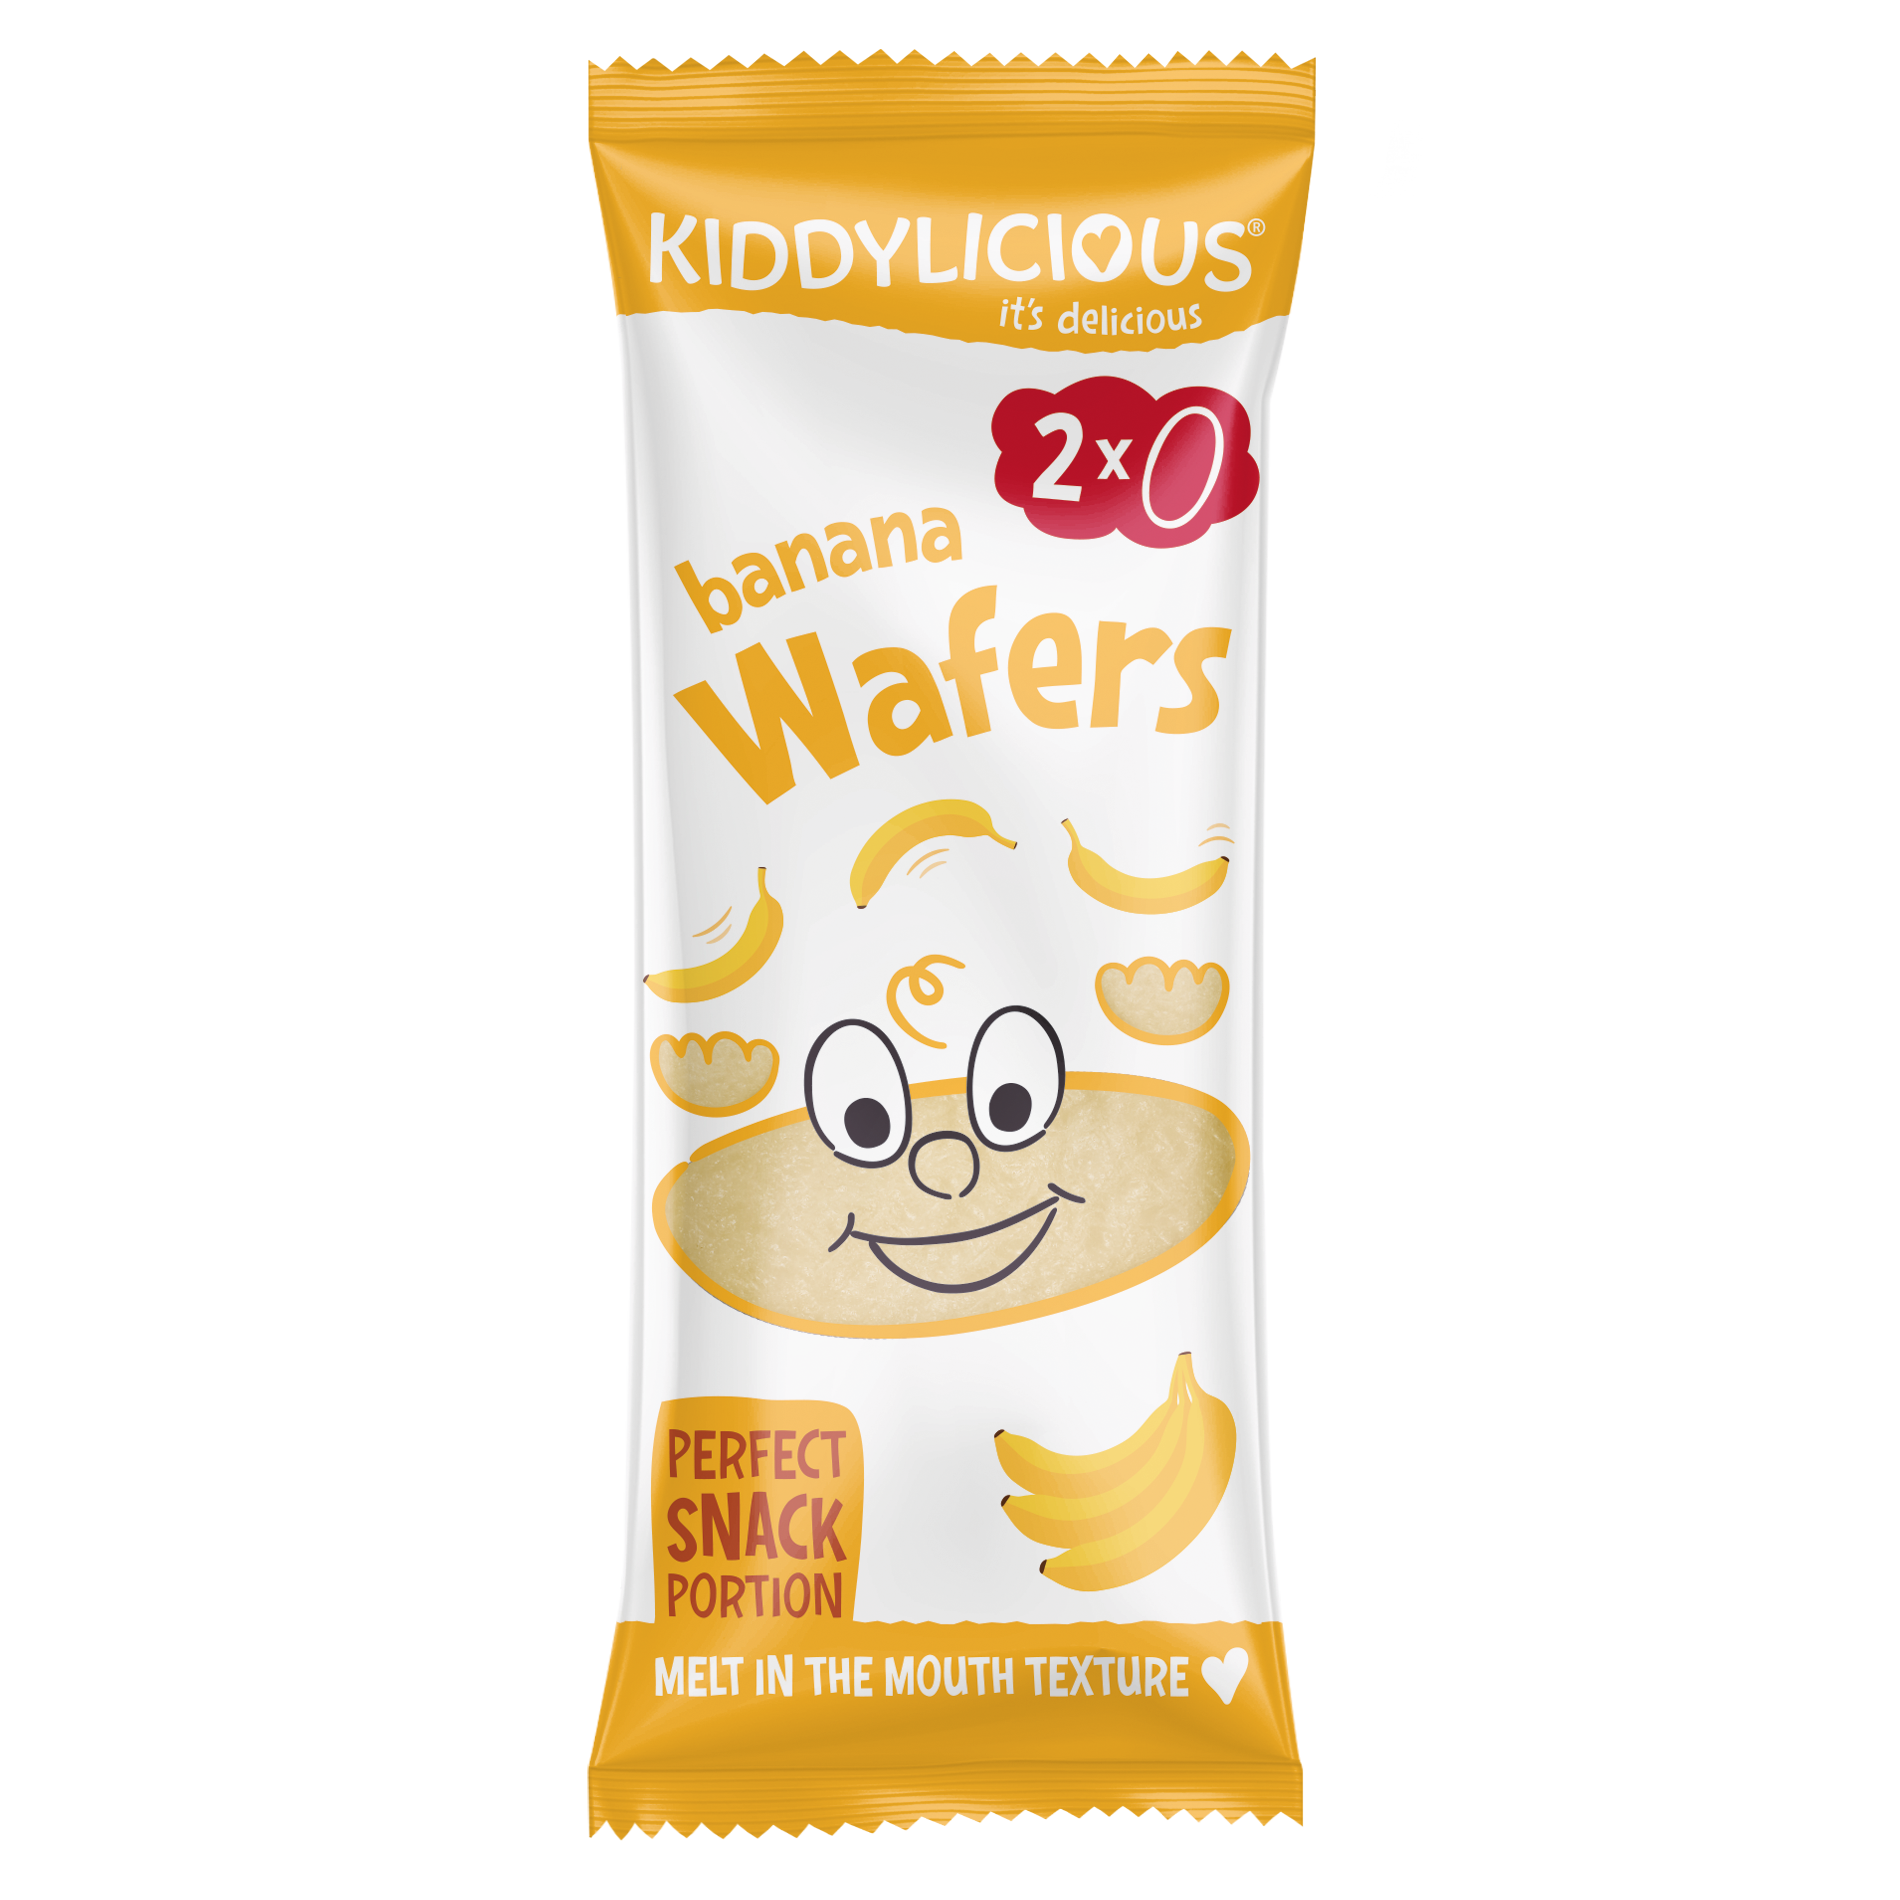 Kiddylicious Wafers Reviews